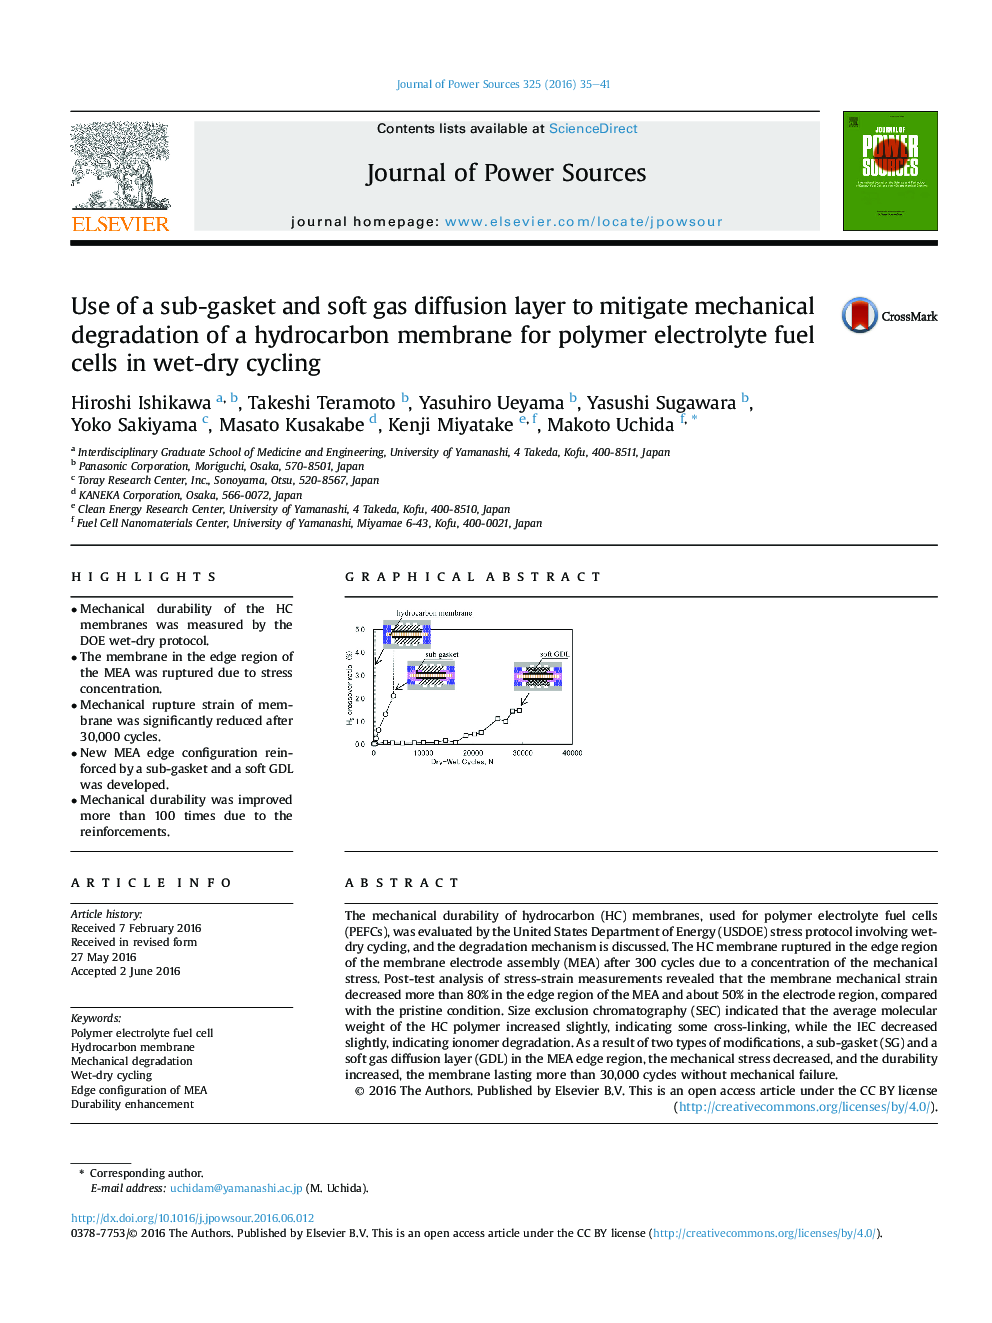 Use of a sub-gasket and soft gas diffusion layer to mitigate mechanical degradation of a hydrocarbon membrane for polymer electrolyte fuel cells in wet-dry cycling